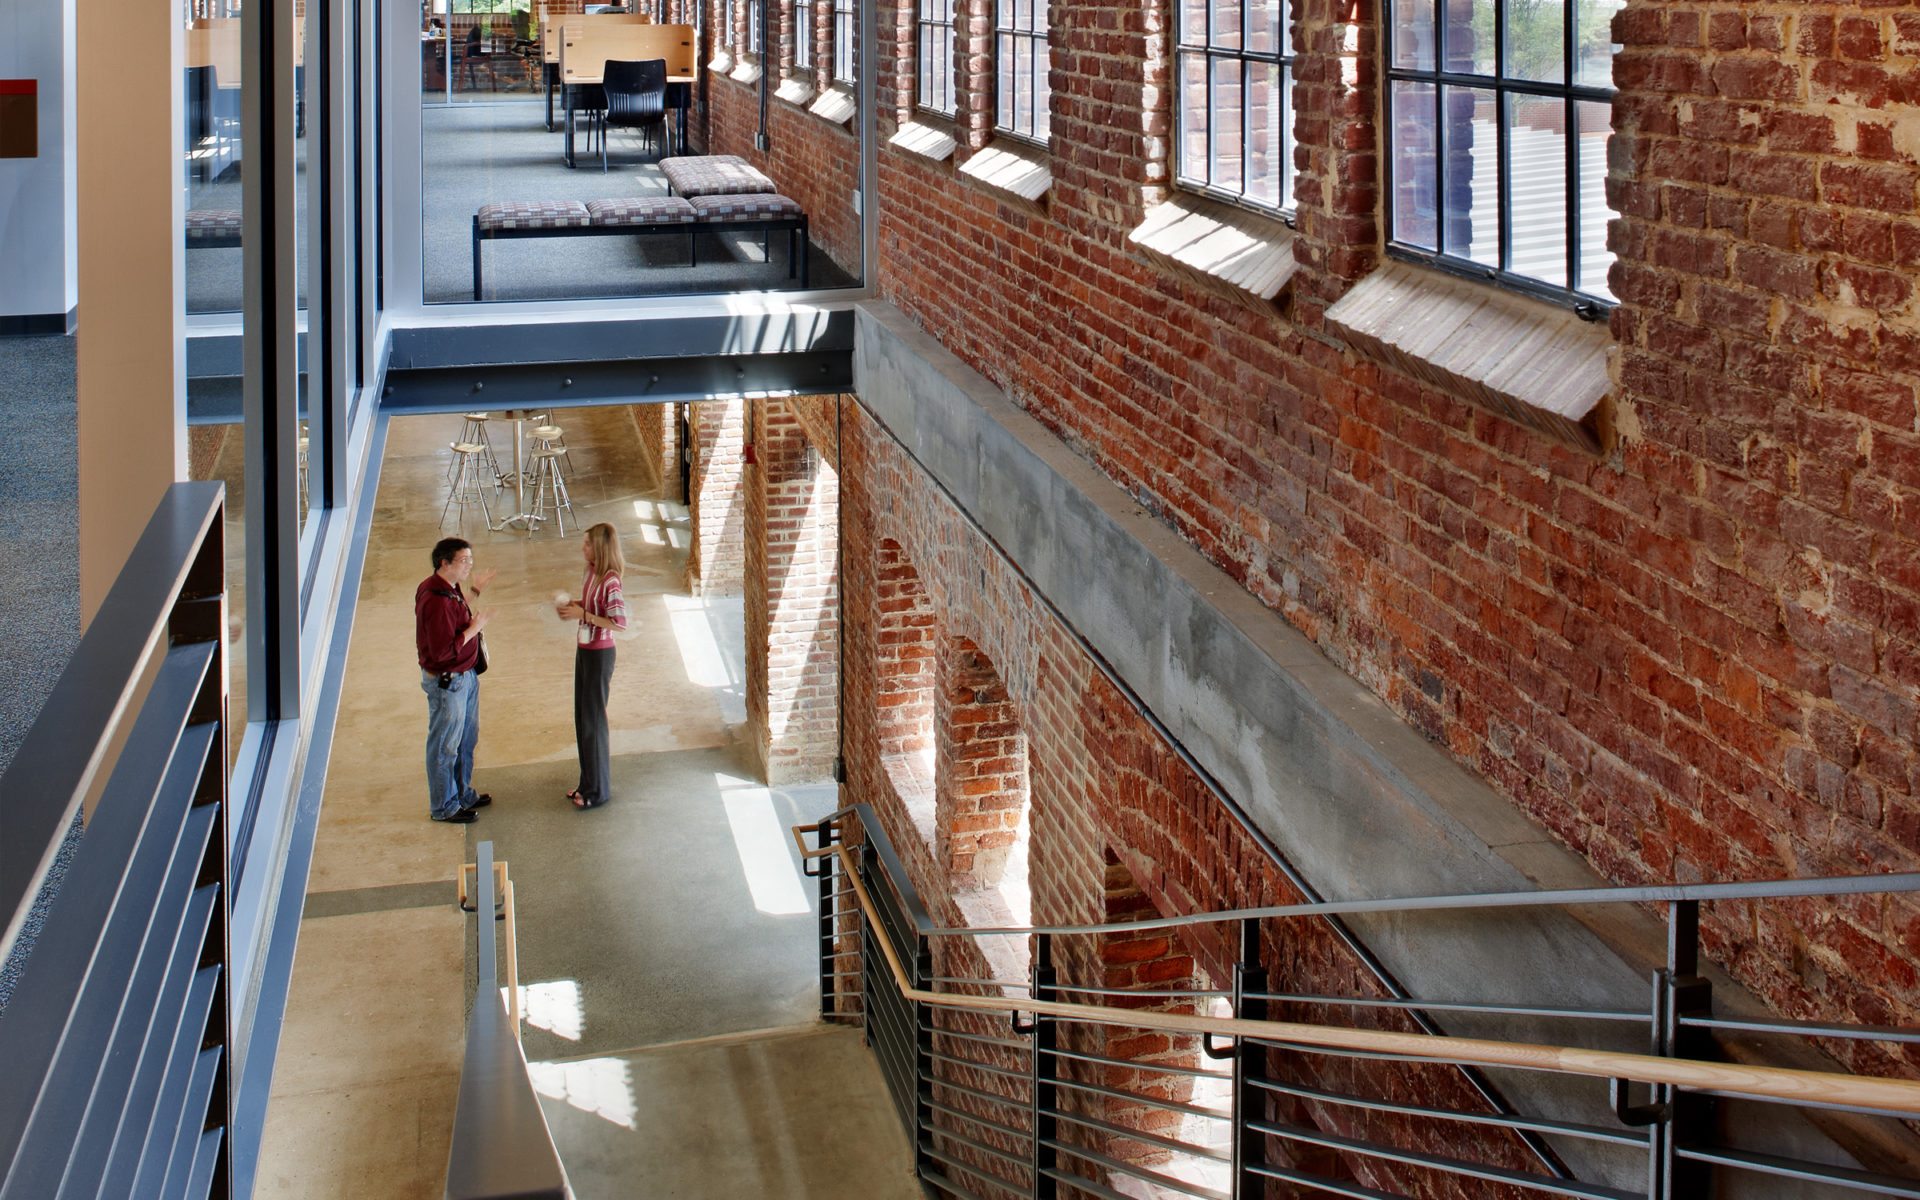 Park Shops adaptive reuse at NC State University in Raleigh, NC; Architect: Clark Nexsen